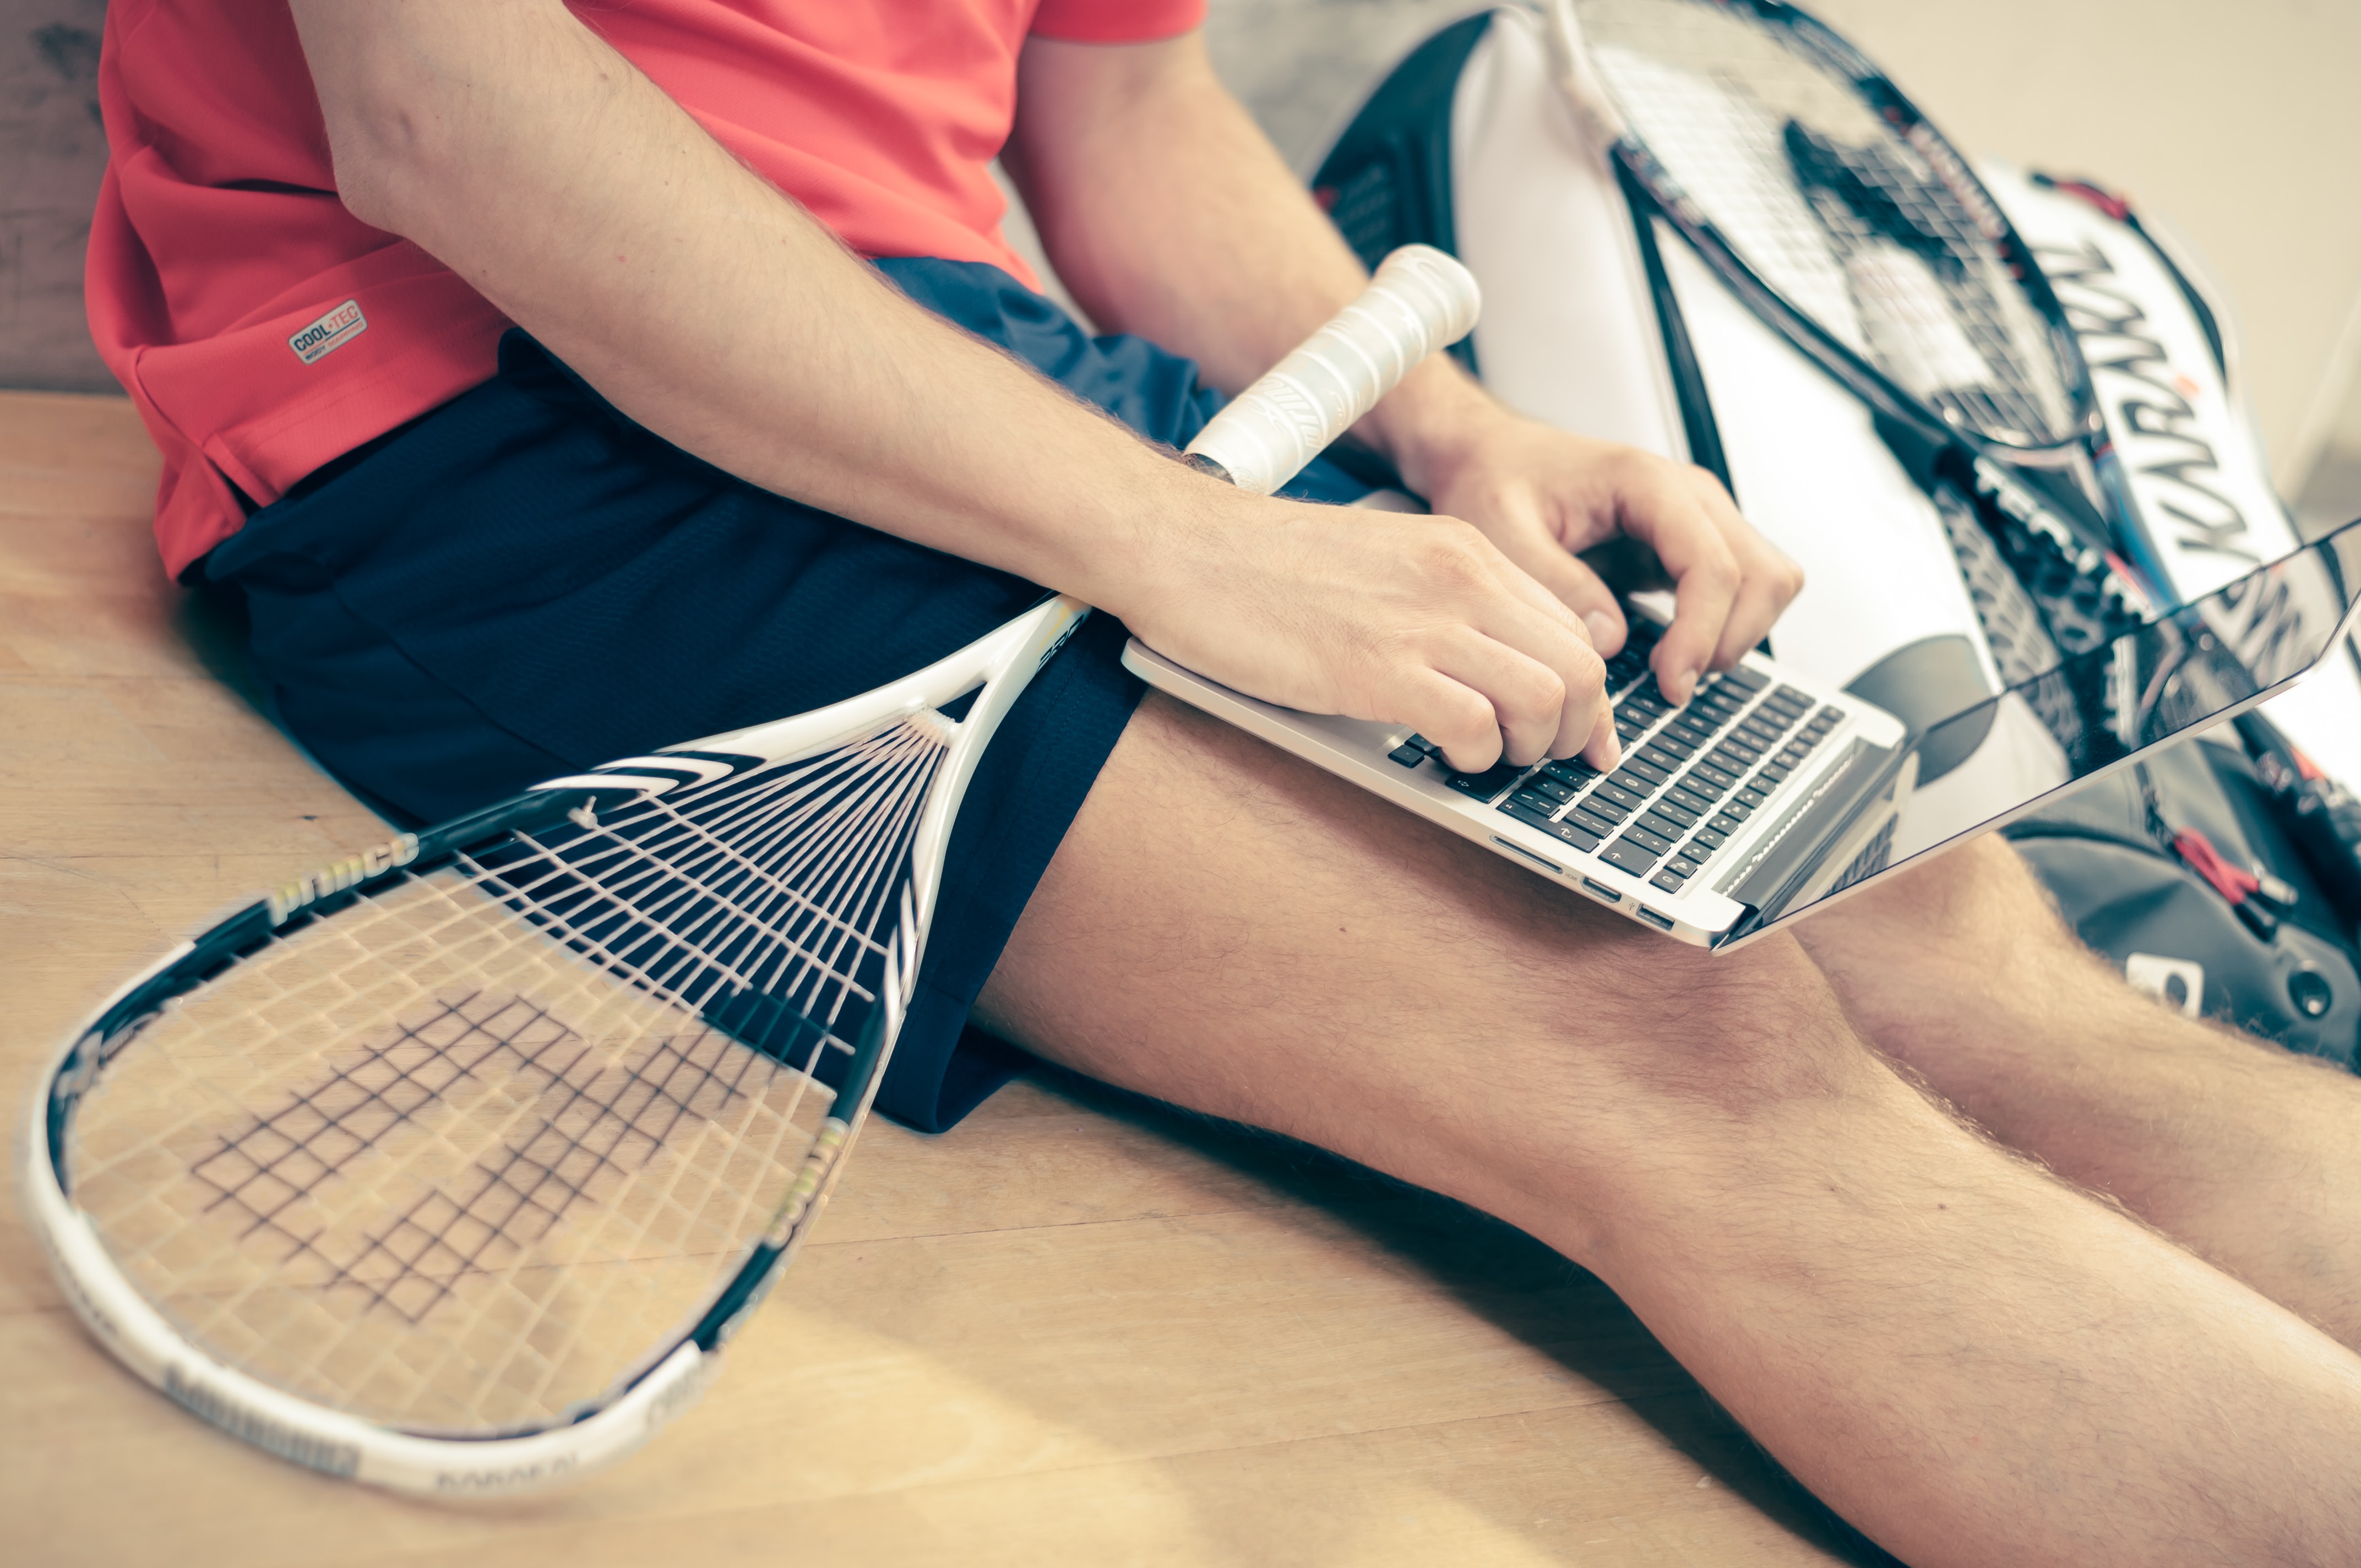 Man holding squash racket sits on gym floor typing on a laptop.